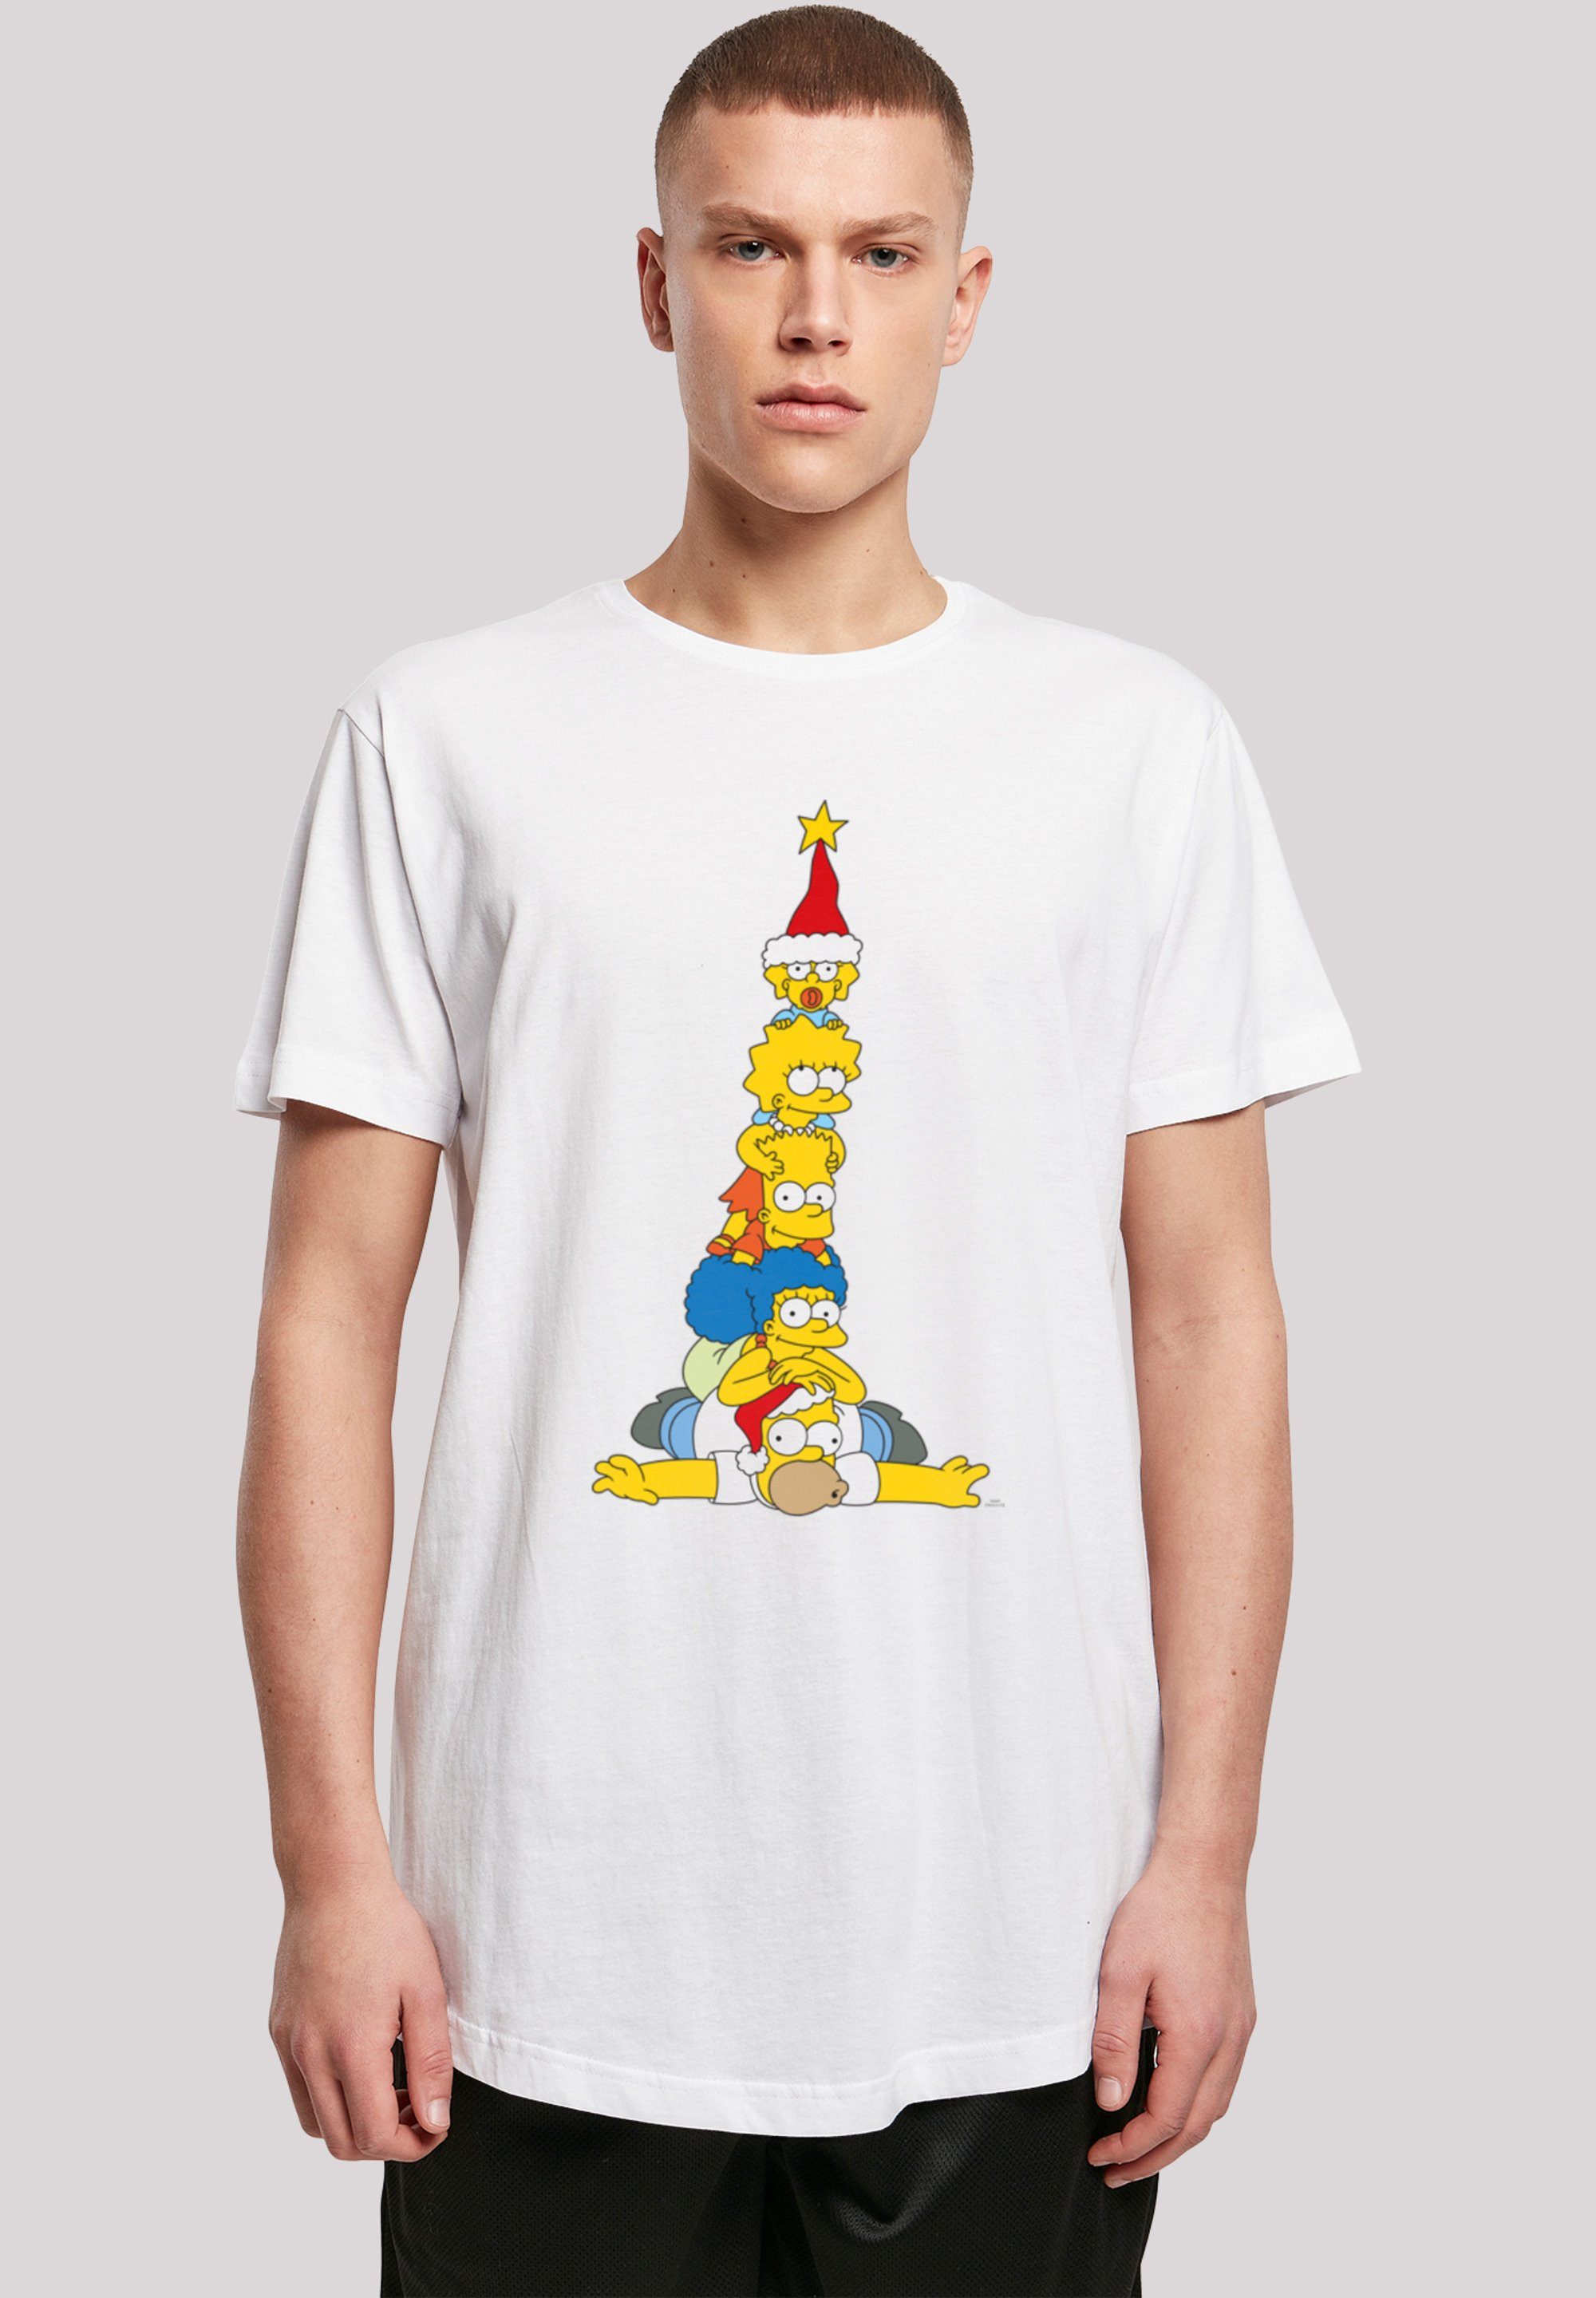 F4NT4STIC T-Shirt The Weihnachtsbaum Family Print Simpsons Christmas weiß